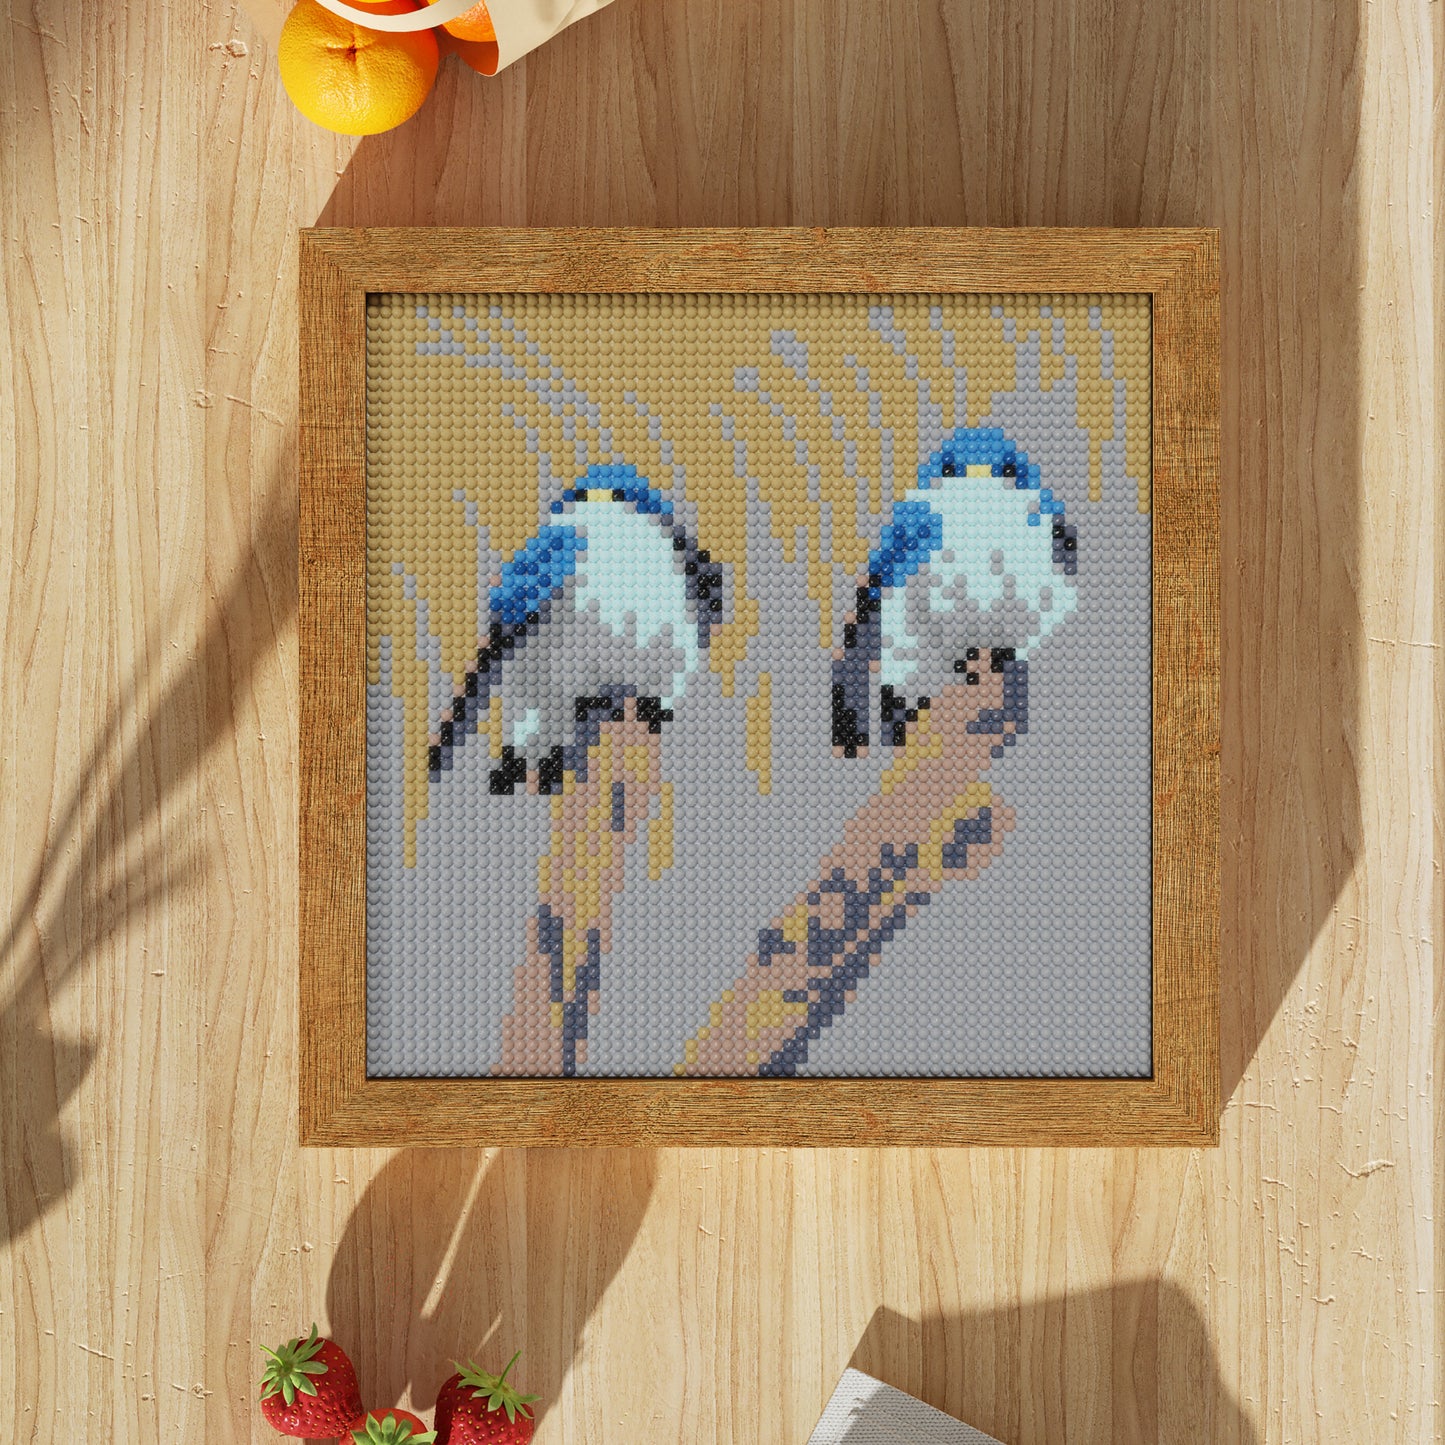 DIY 64x64 Pixels "Two Birds on Branch" Diamond Painting Kit - Express a Theme of Love, Companionship and Togetherness